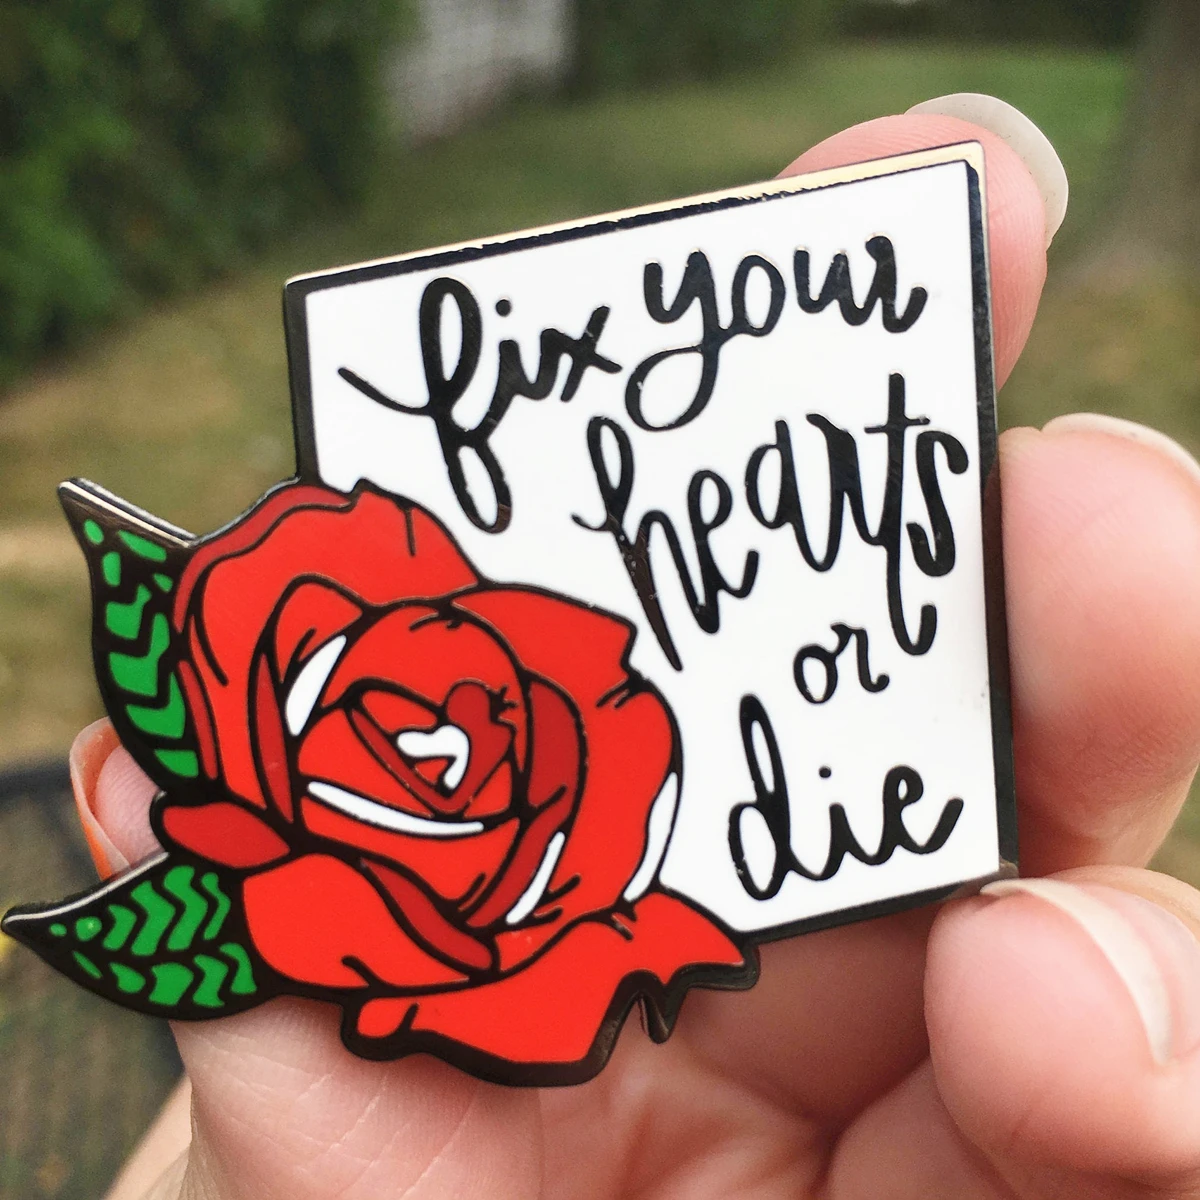 Fix Your Heart or Die Head Enamel Pin Cartoon Beautiful Red Rose Plant Brooch Accessories Fashion Lapel Backpack Badge Jewelry